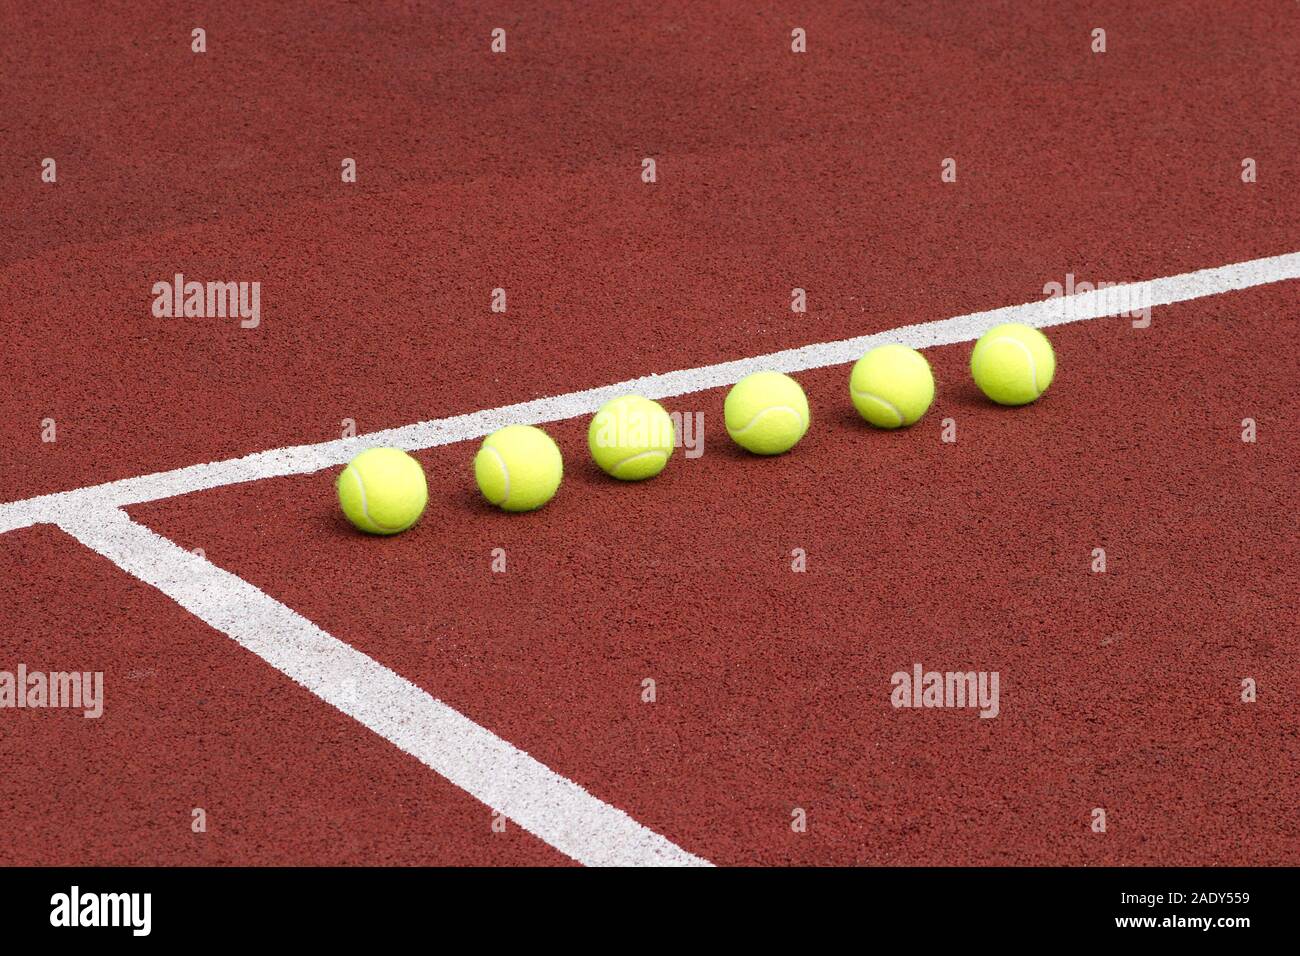 Line of six yellow tennis balls on red synthetic court side view Stock Photo